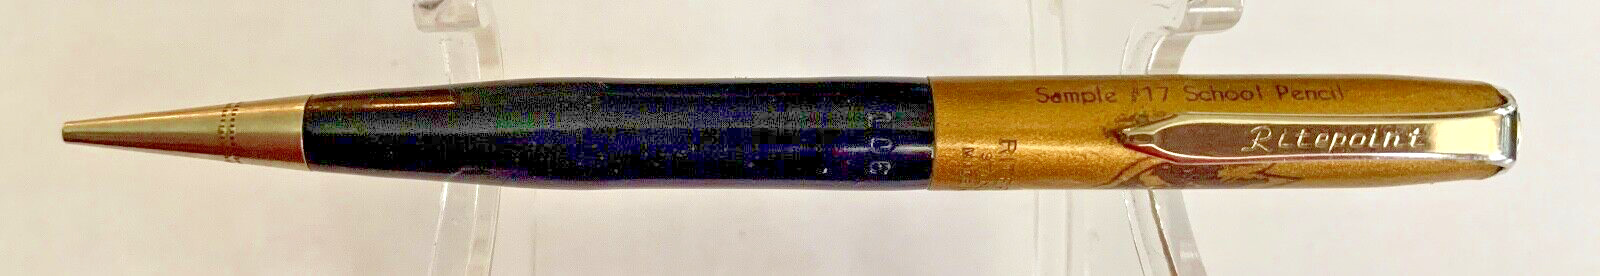 VINTAGE RITEPOINT 106 ADVERTISING MECHANICAL PENCIL, BLUE/GOLD W/ CHROME, 1960'S